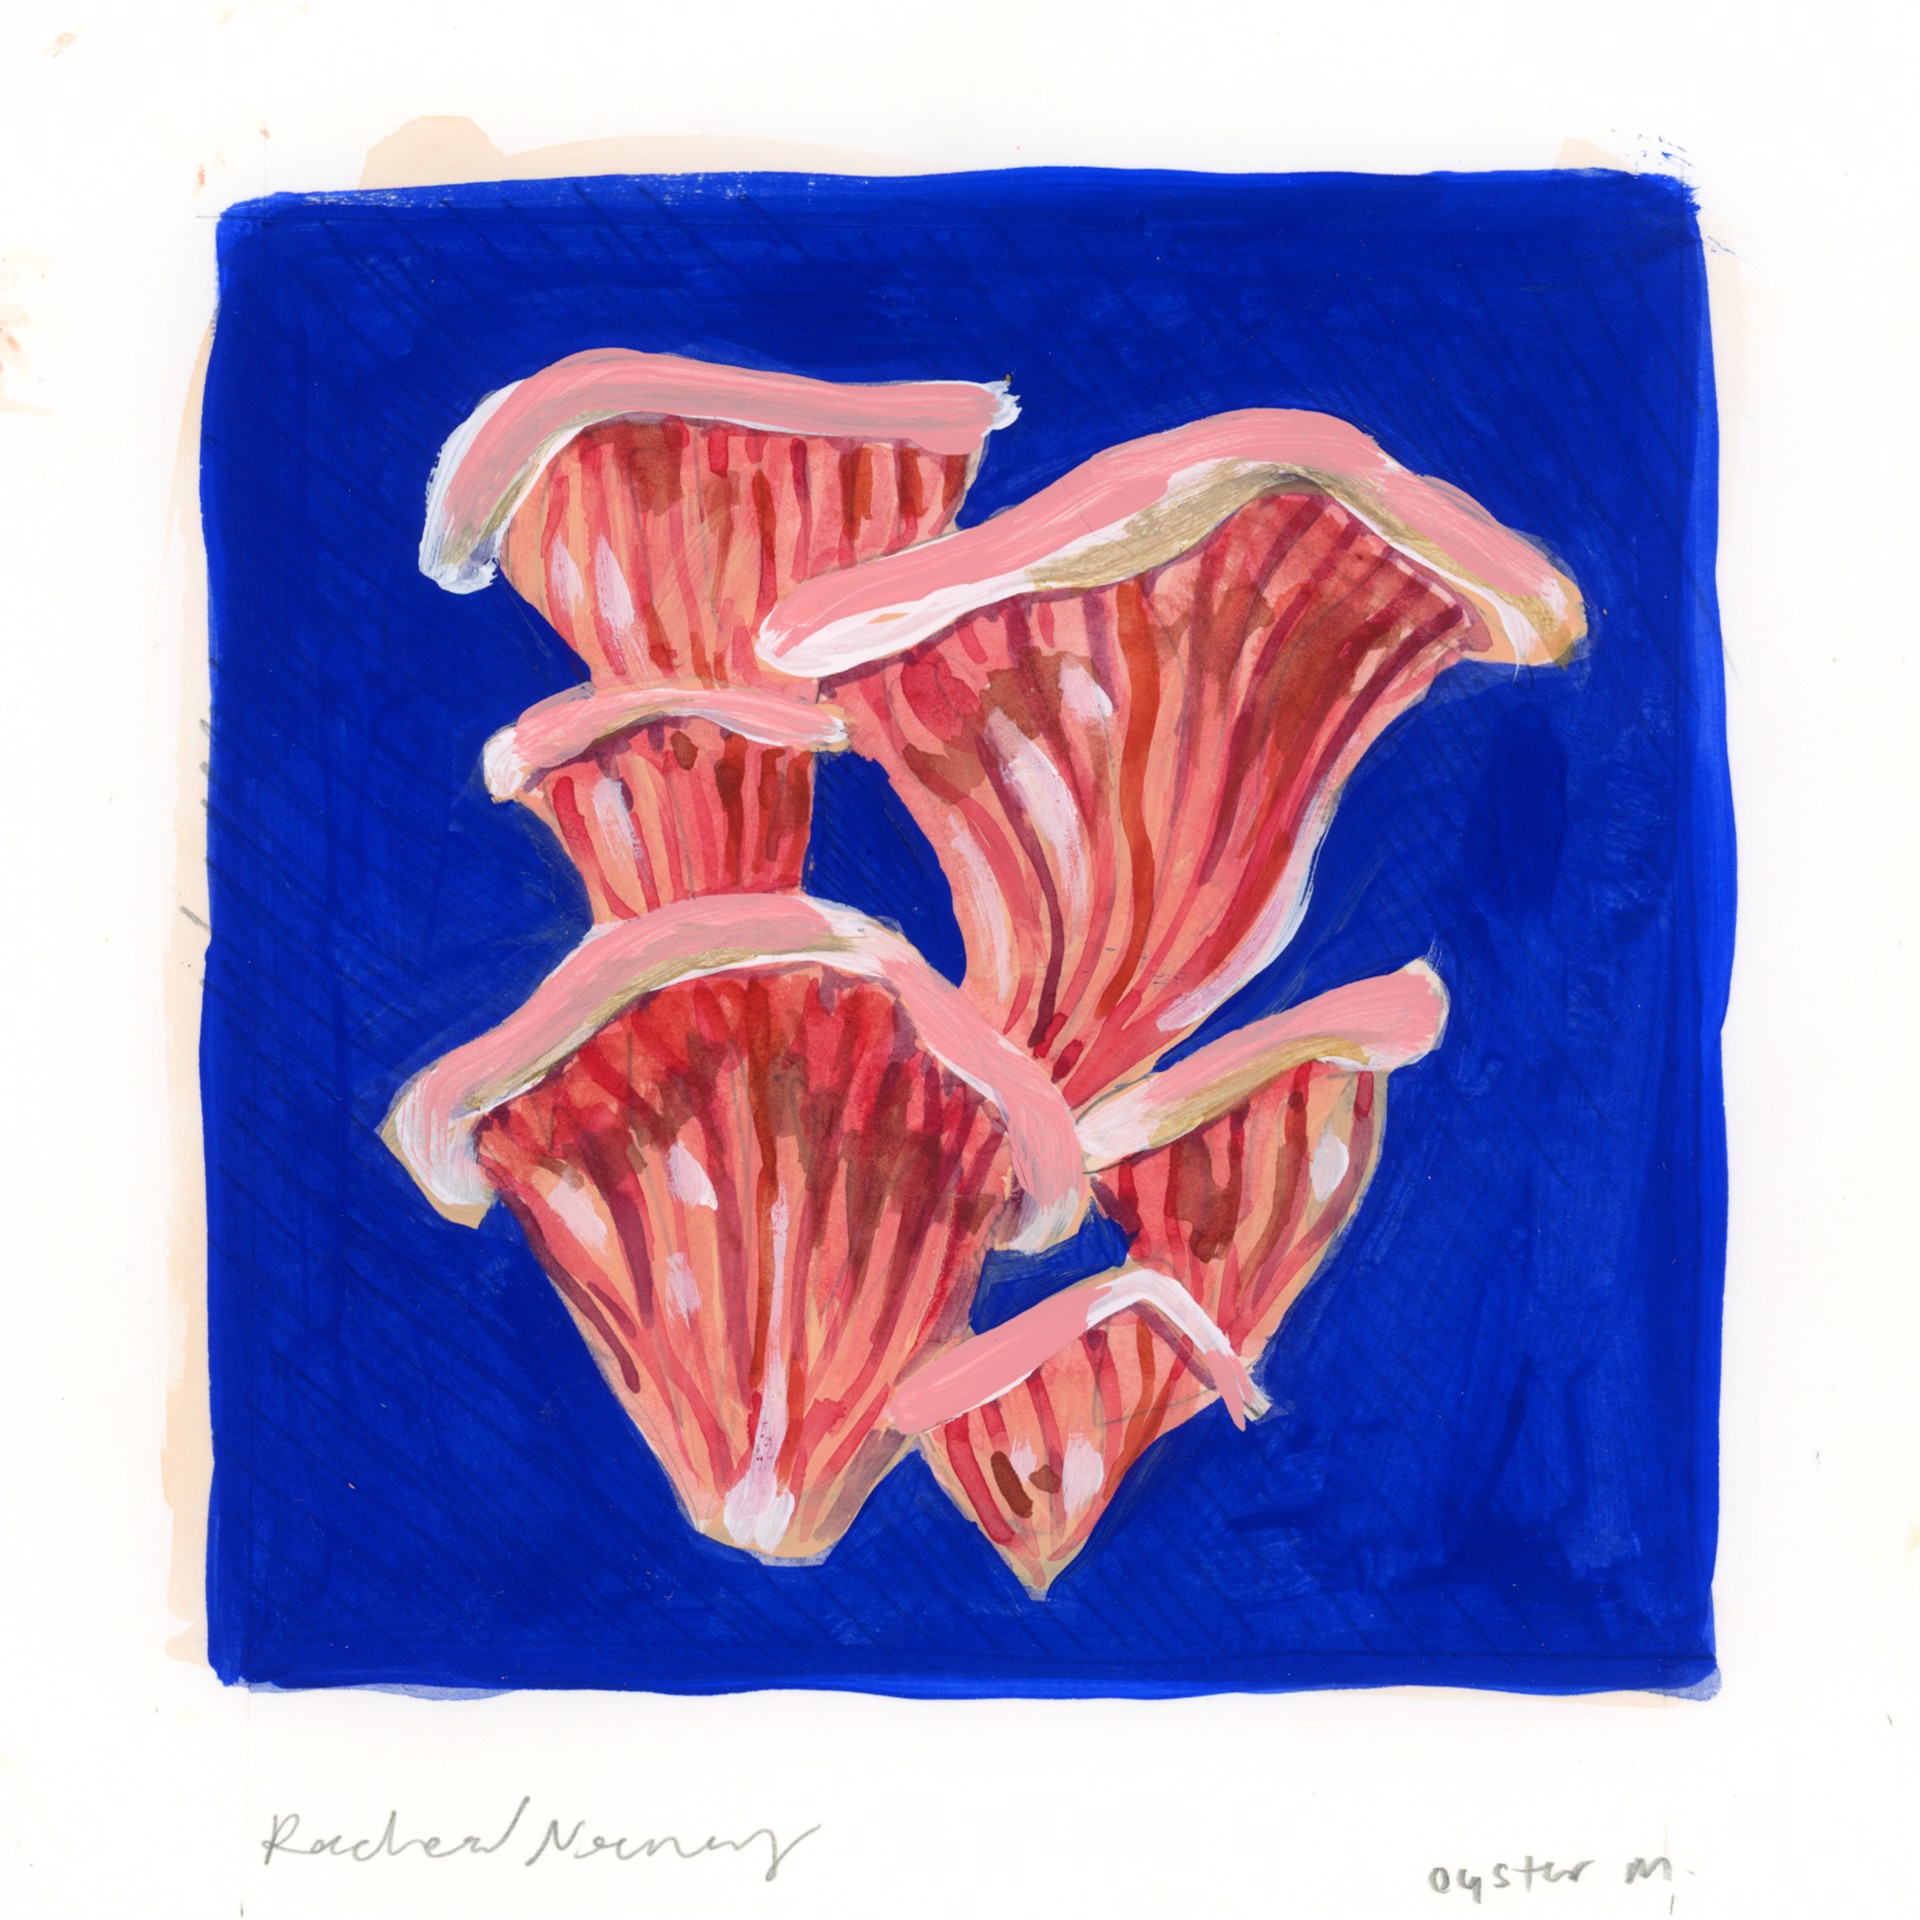 Oyster Mushrooms by Rachael Nerney